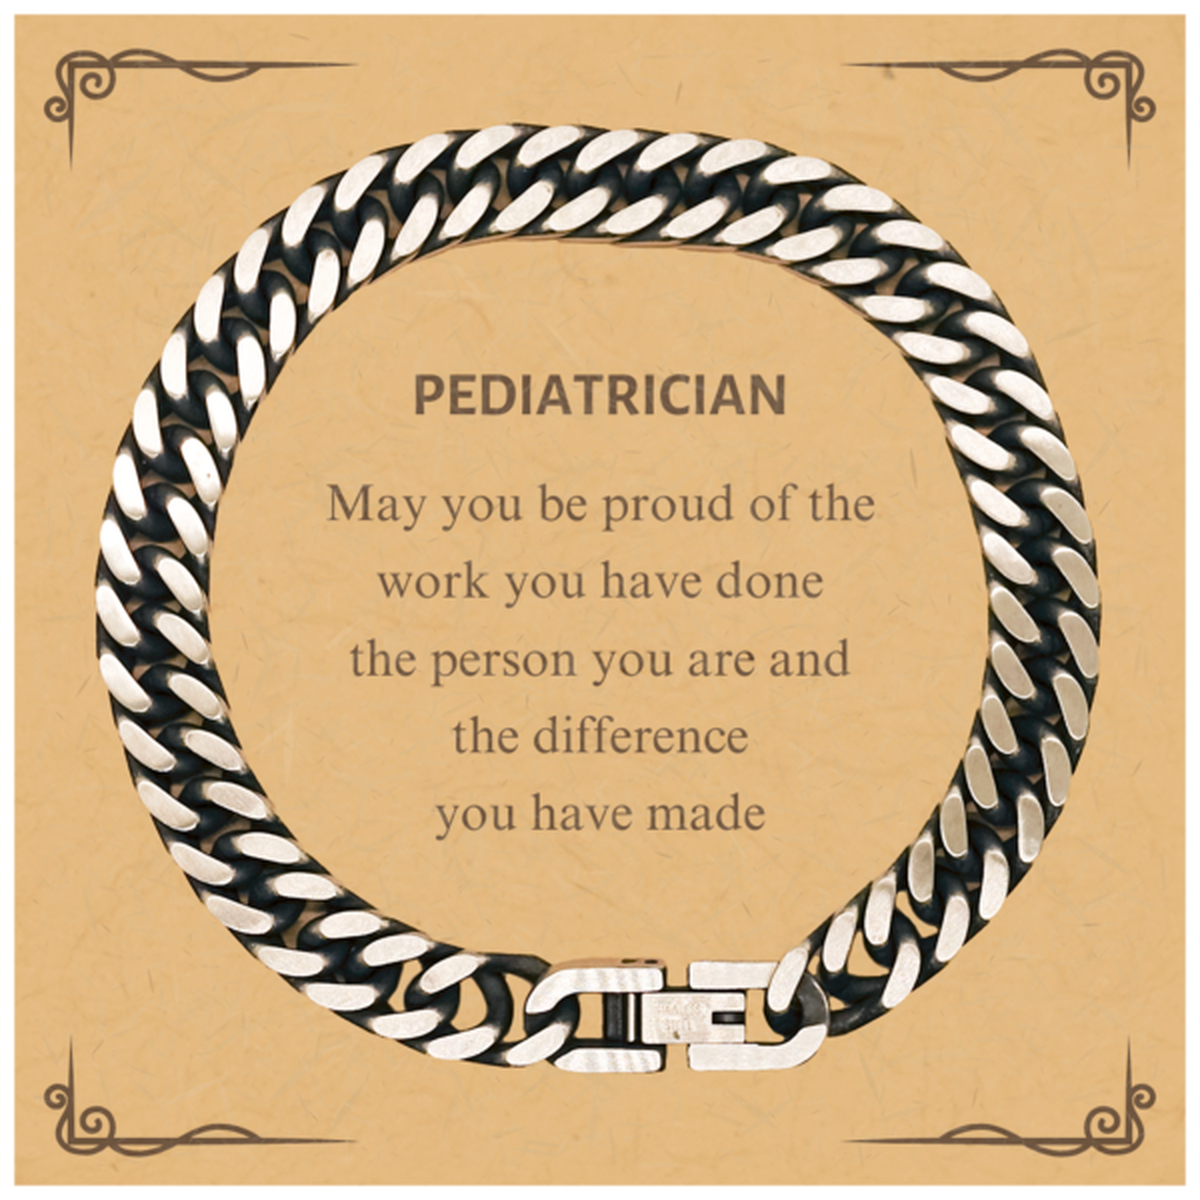 Pediatrician May you be proud of the work you have done, Retirement Pediatrician Cuban Link Chain Bracelet for Colleague Appreciation Gifts Amazing for Pediatrician